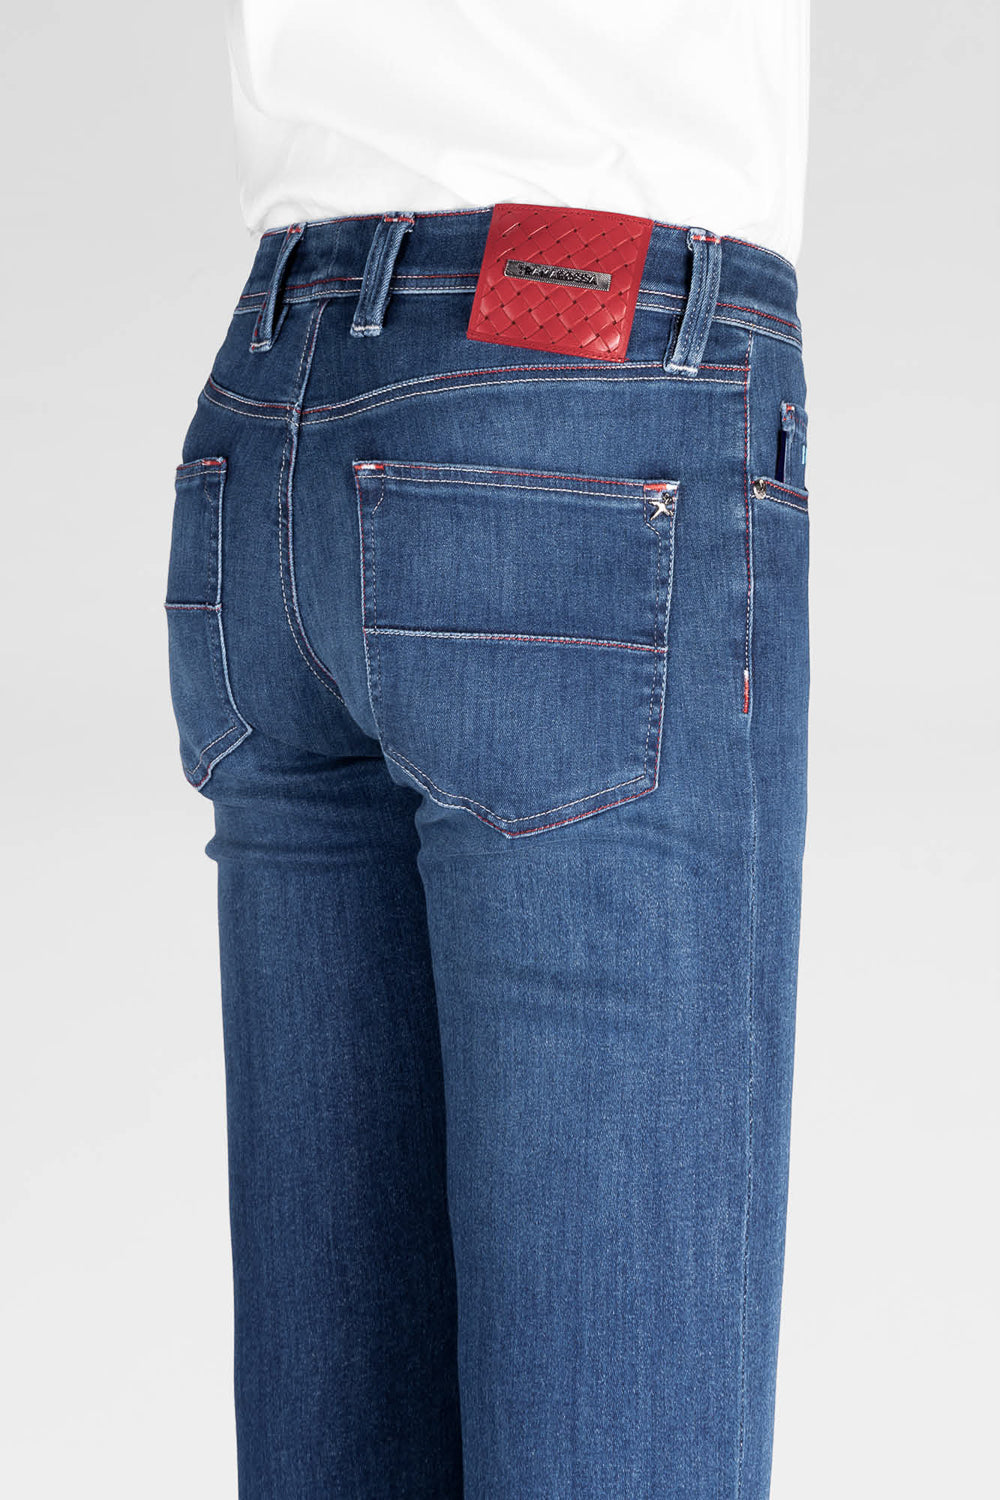 Buy the Tramarossa Leonardo ZIP SS Jean in Blue/Red at Intro. Spend £100 for free UK delivery. Official stockists. We ship worldwide.